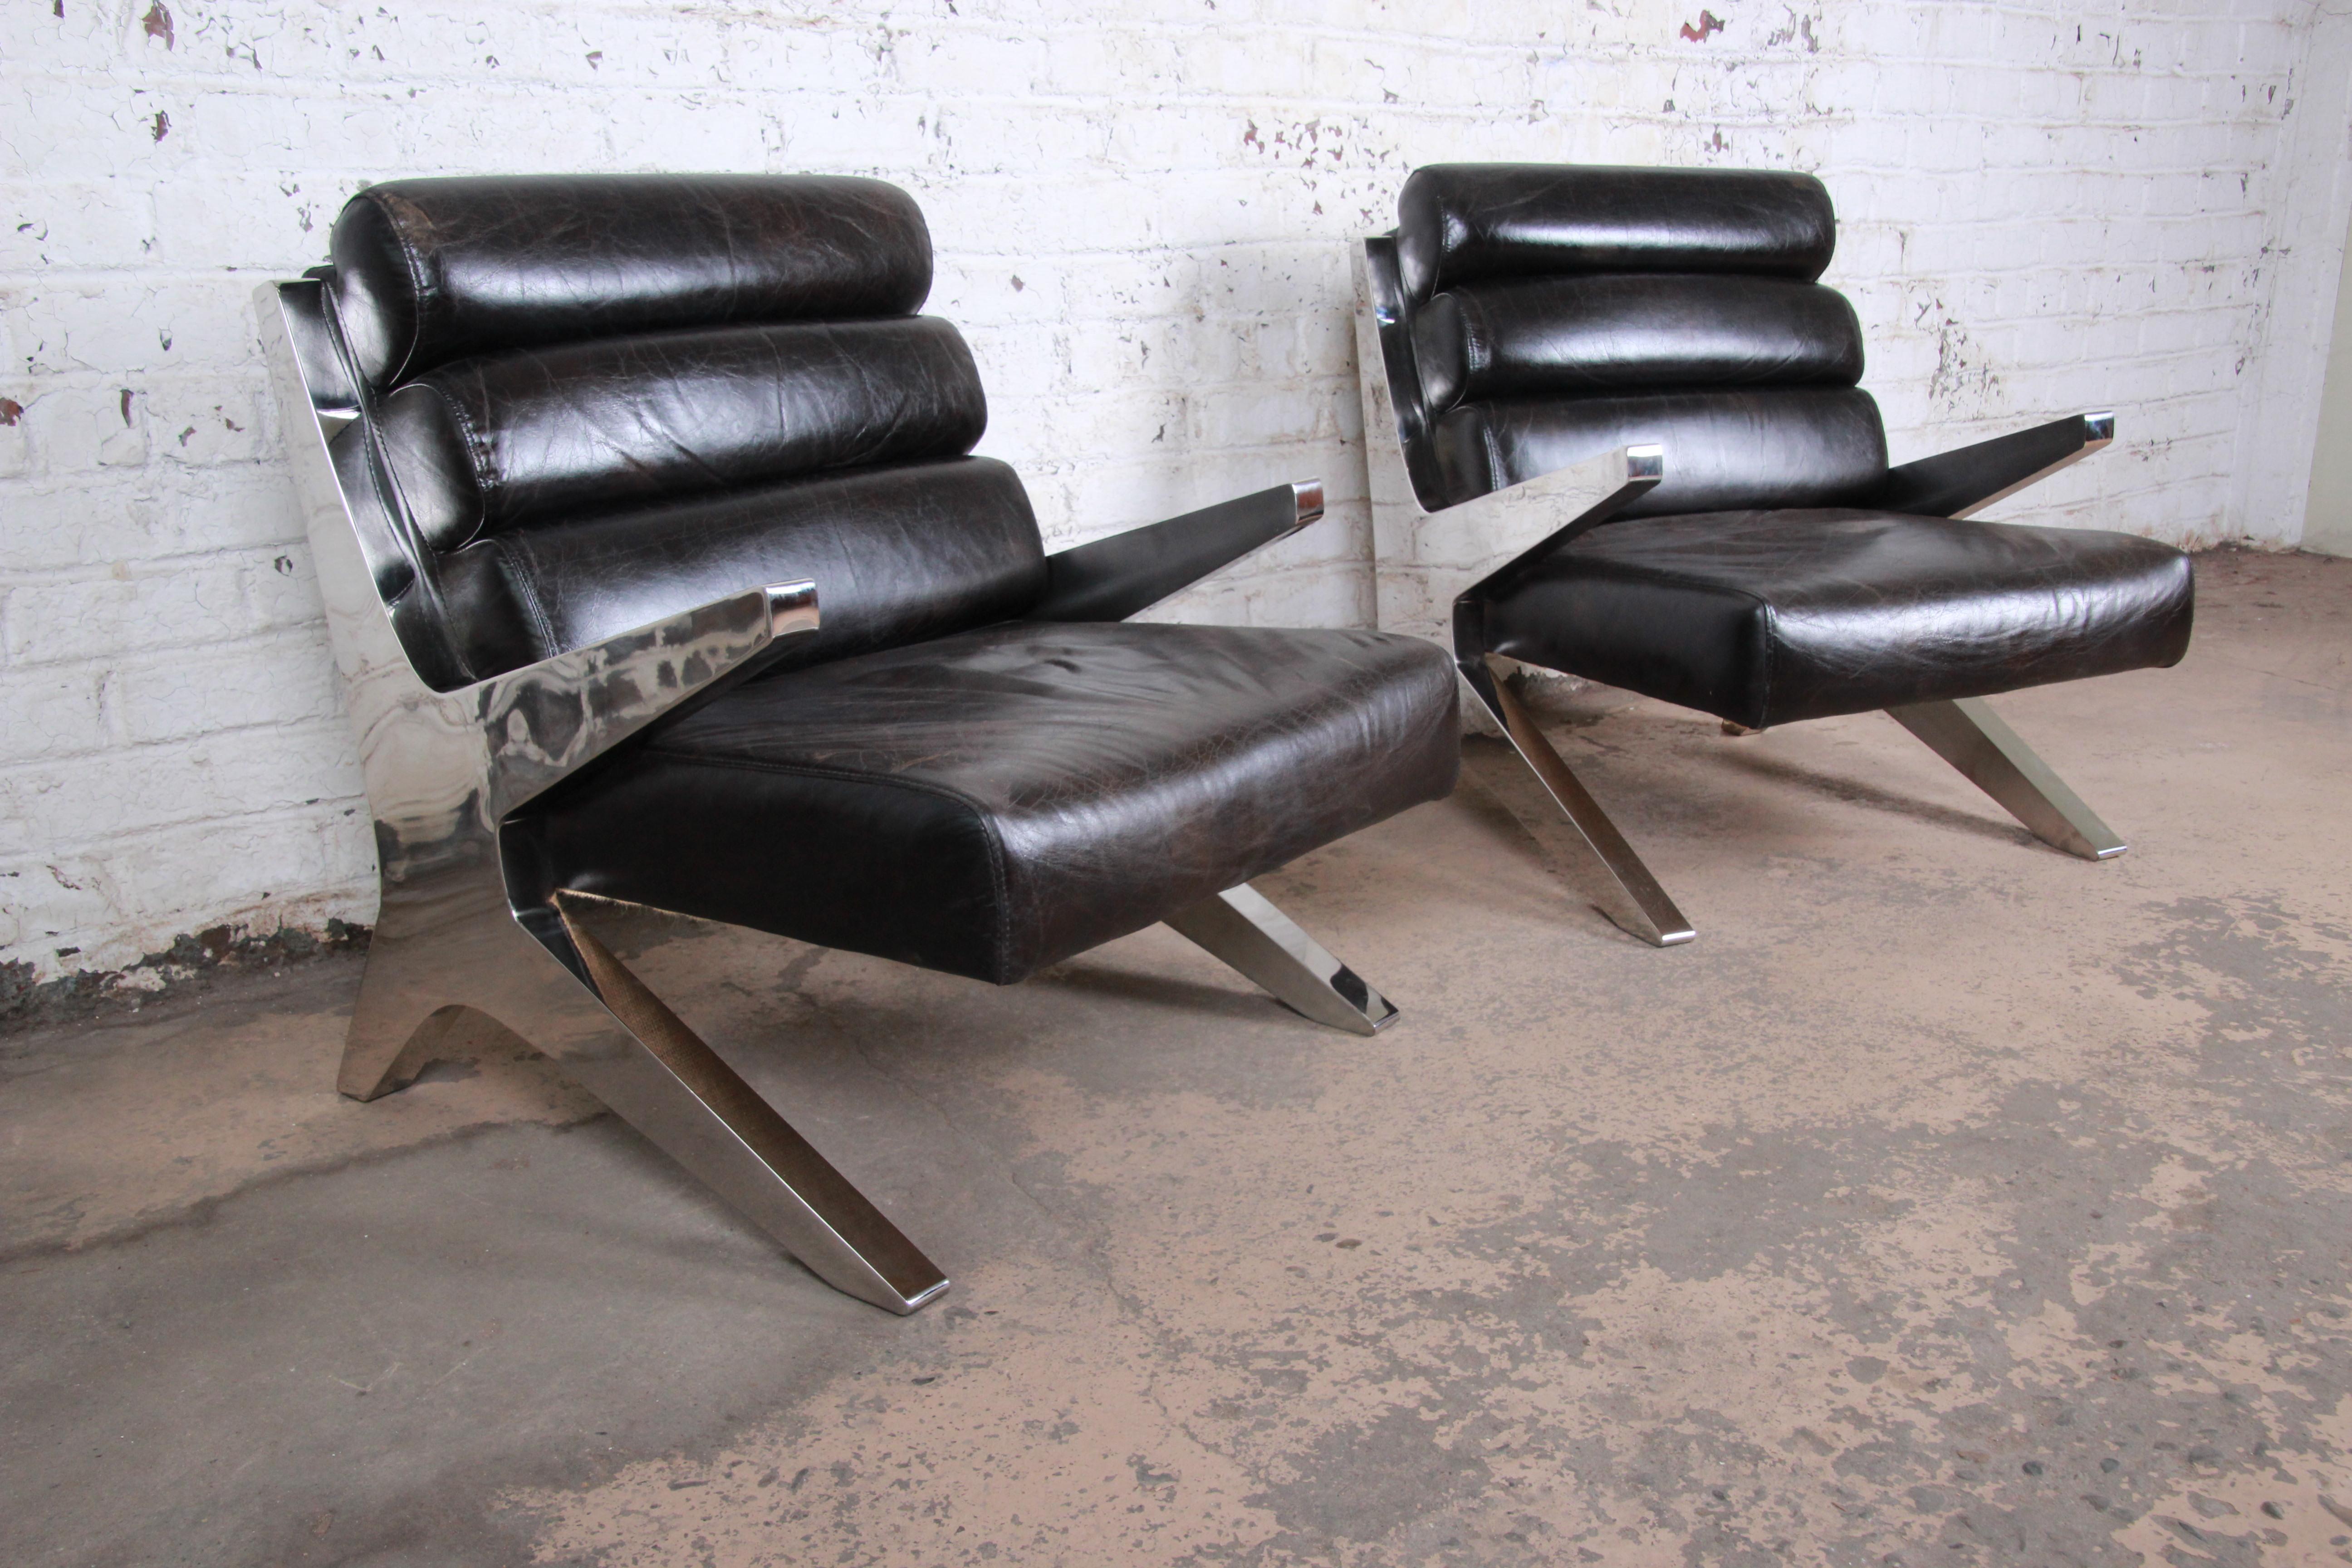 20th Century Mid-Century Modern Chrome and Leather Scissor Form Lounge Chairs, Pair